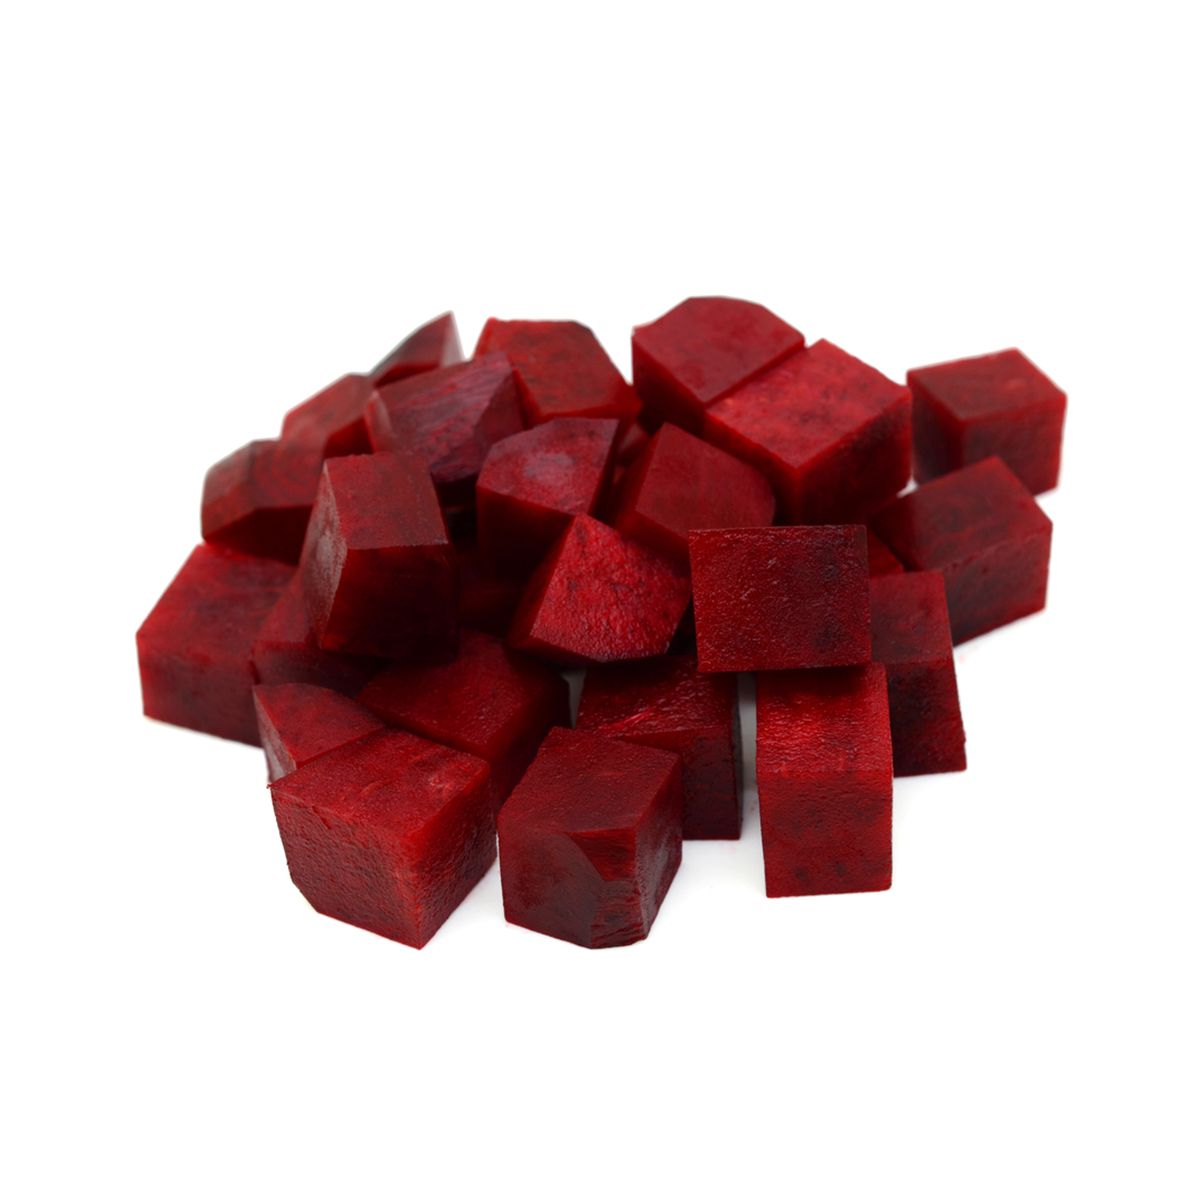 BoxNCase 3/4 Diced Red Beets 5 lb